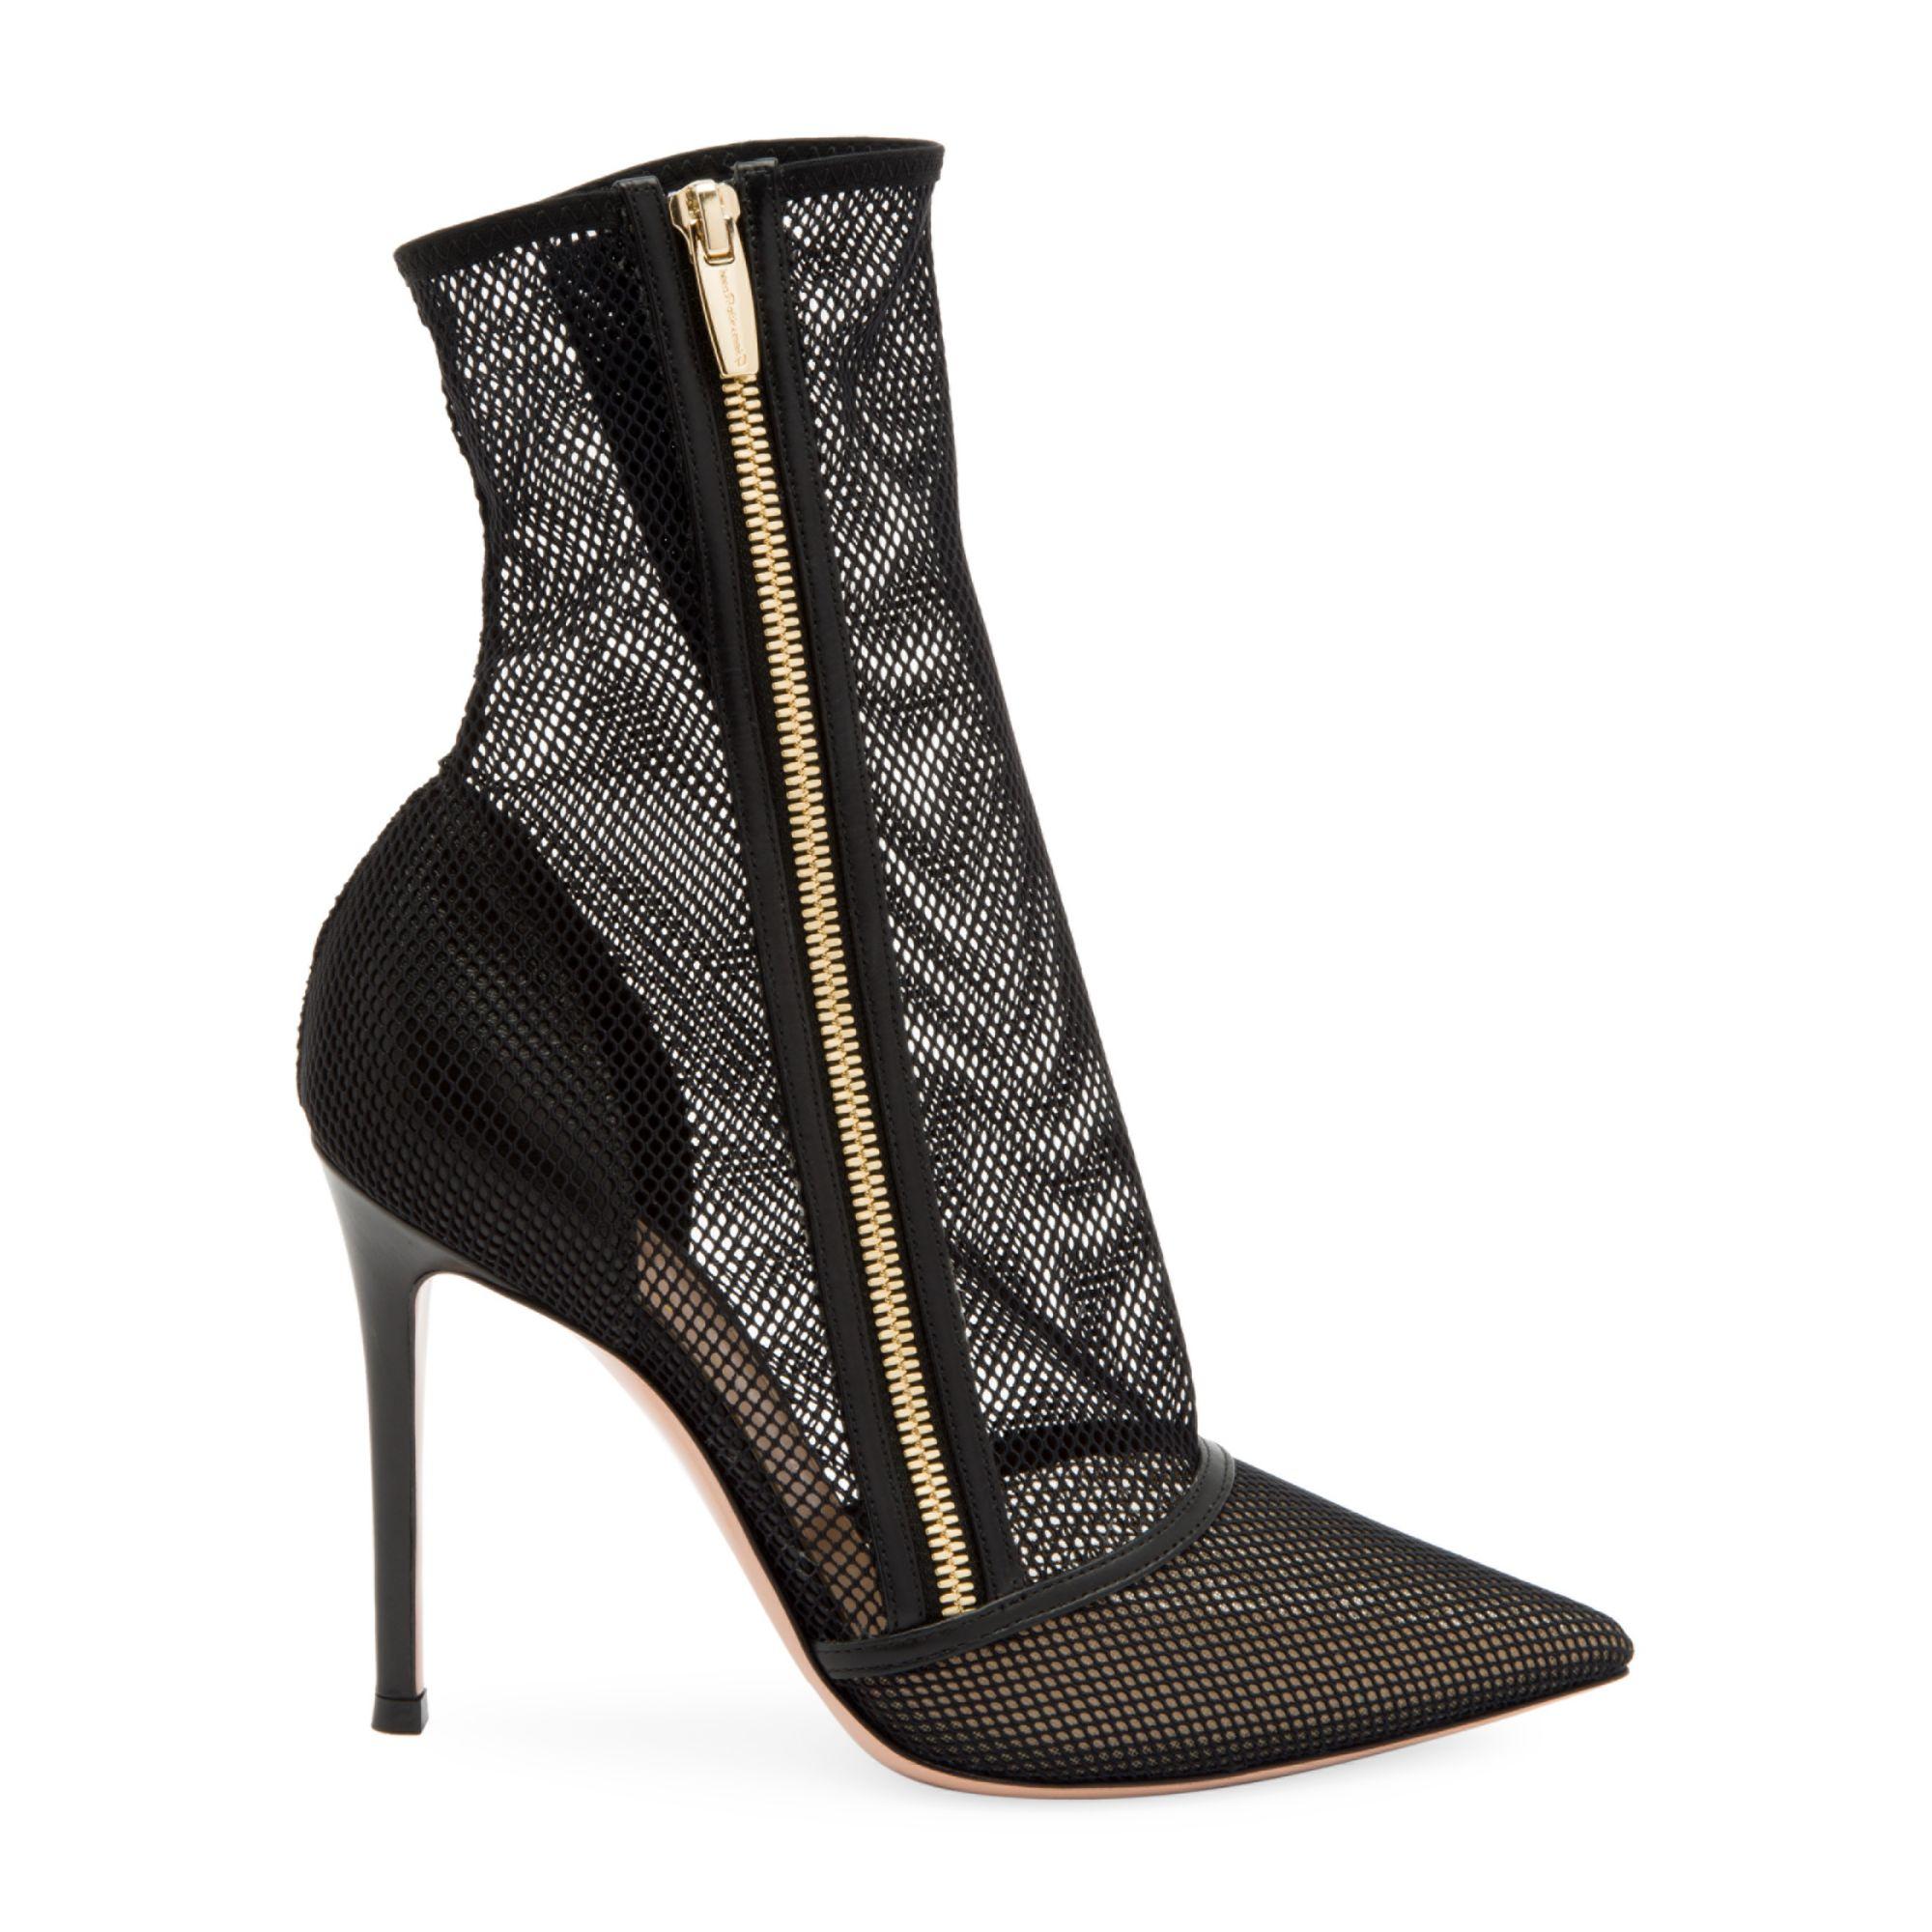 Gianvito Rossi Synthetic Katniss Zip-up Mesh Ankle Boots in Black - Lyst